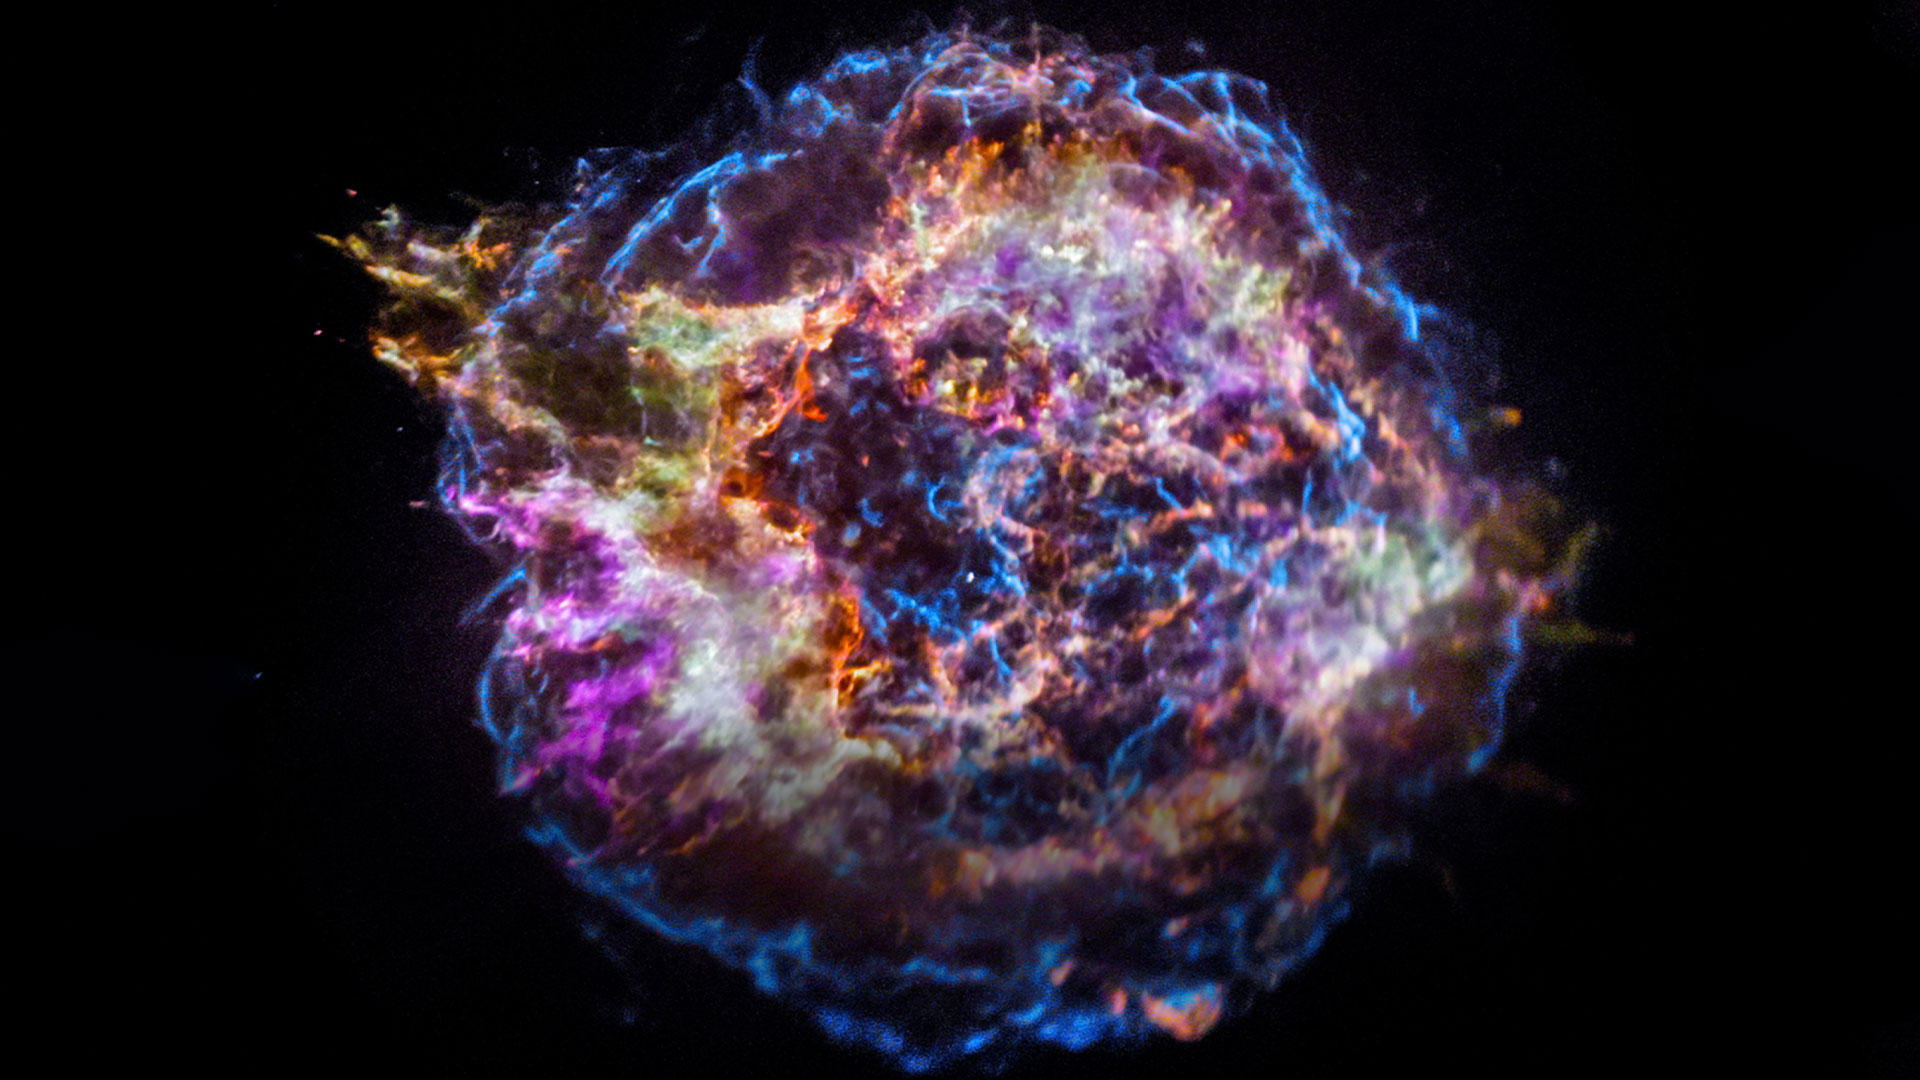 Explore big discoveries that have revolutionized our understanding of the universe.